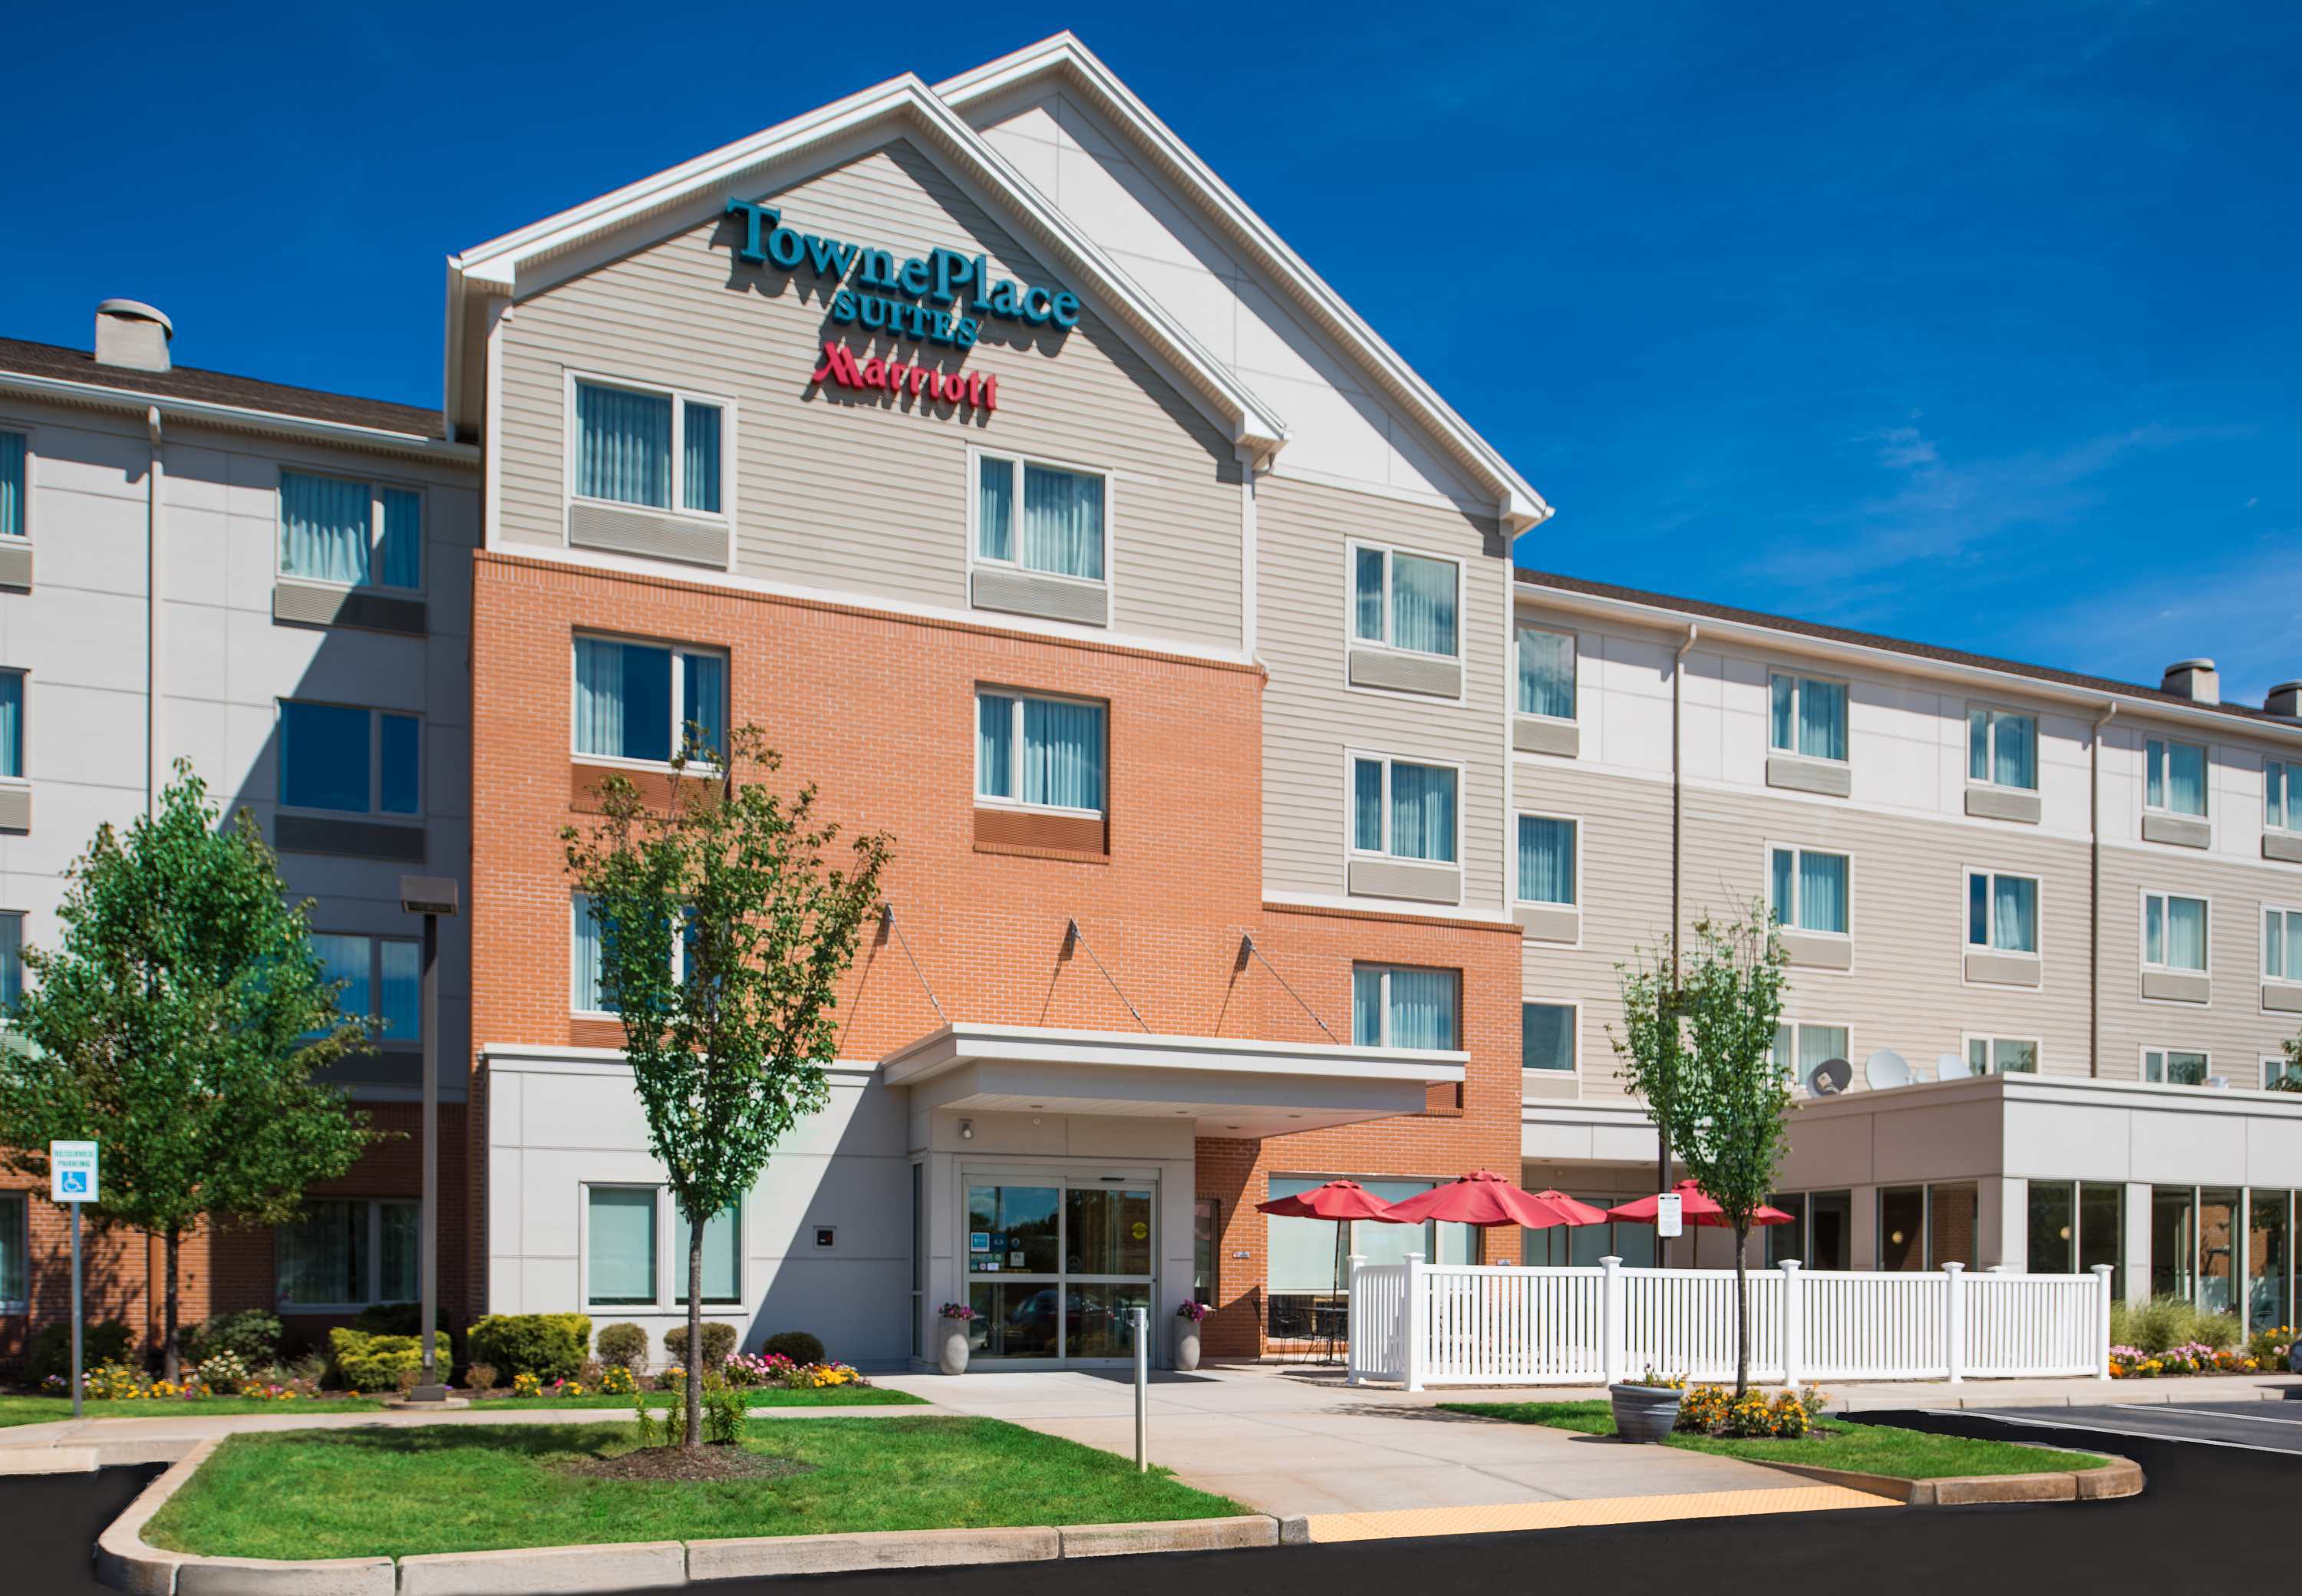 Photo of TownePlace Suites Providence North Kingstown, North Kingstown, RI